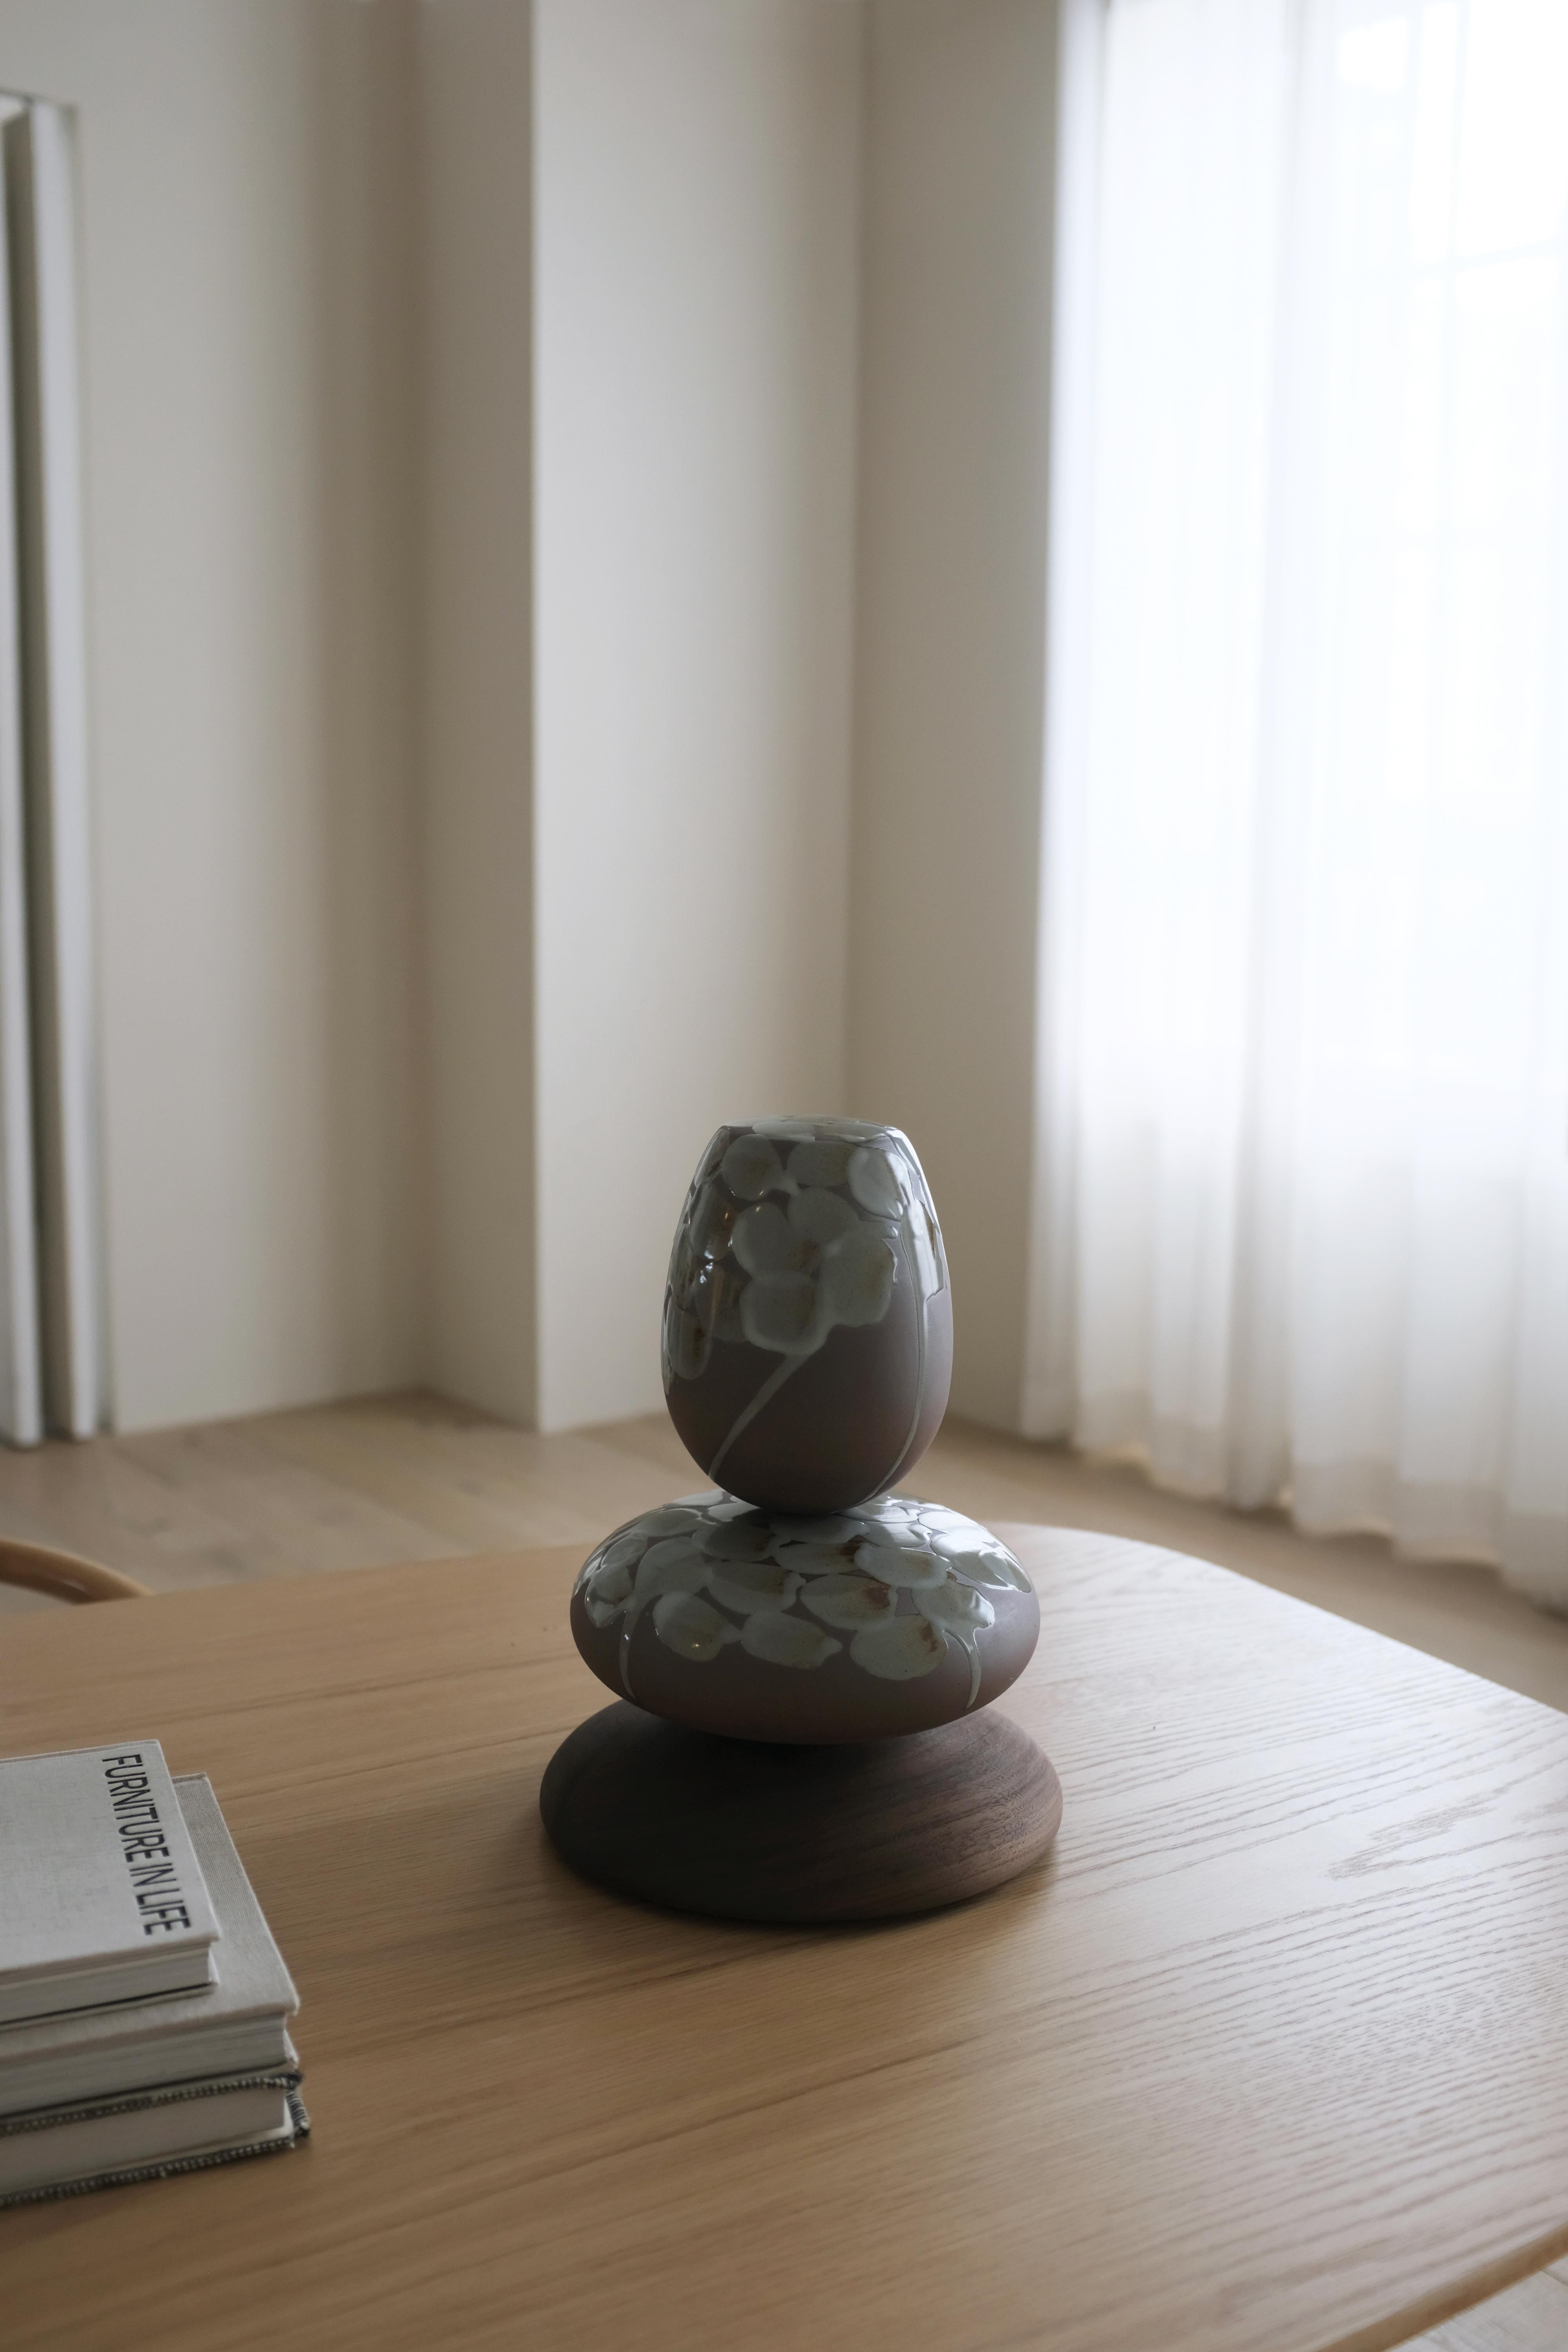 Brush Stroke Stack Sculpture is a small table sculpture in Ceramic. These small stack sculptures are a contemporary iteration of traditional Korean aesthetics by the artist Soo Joo, and they bring a sense of peace and balance to the home. The